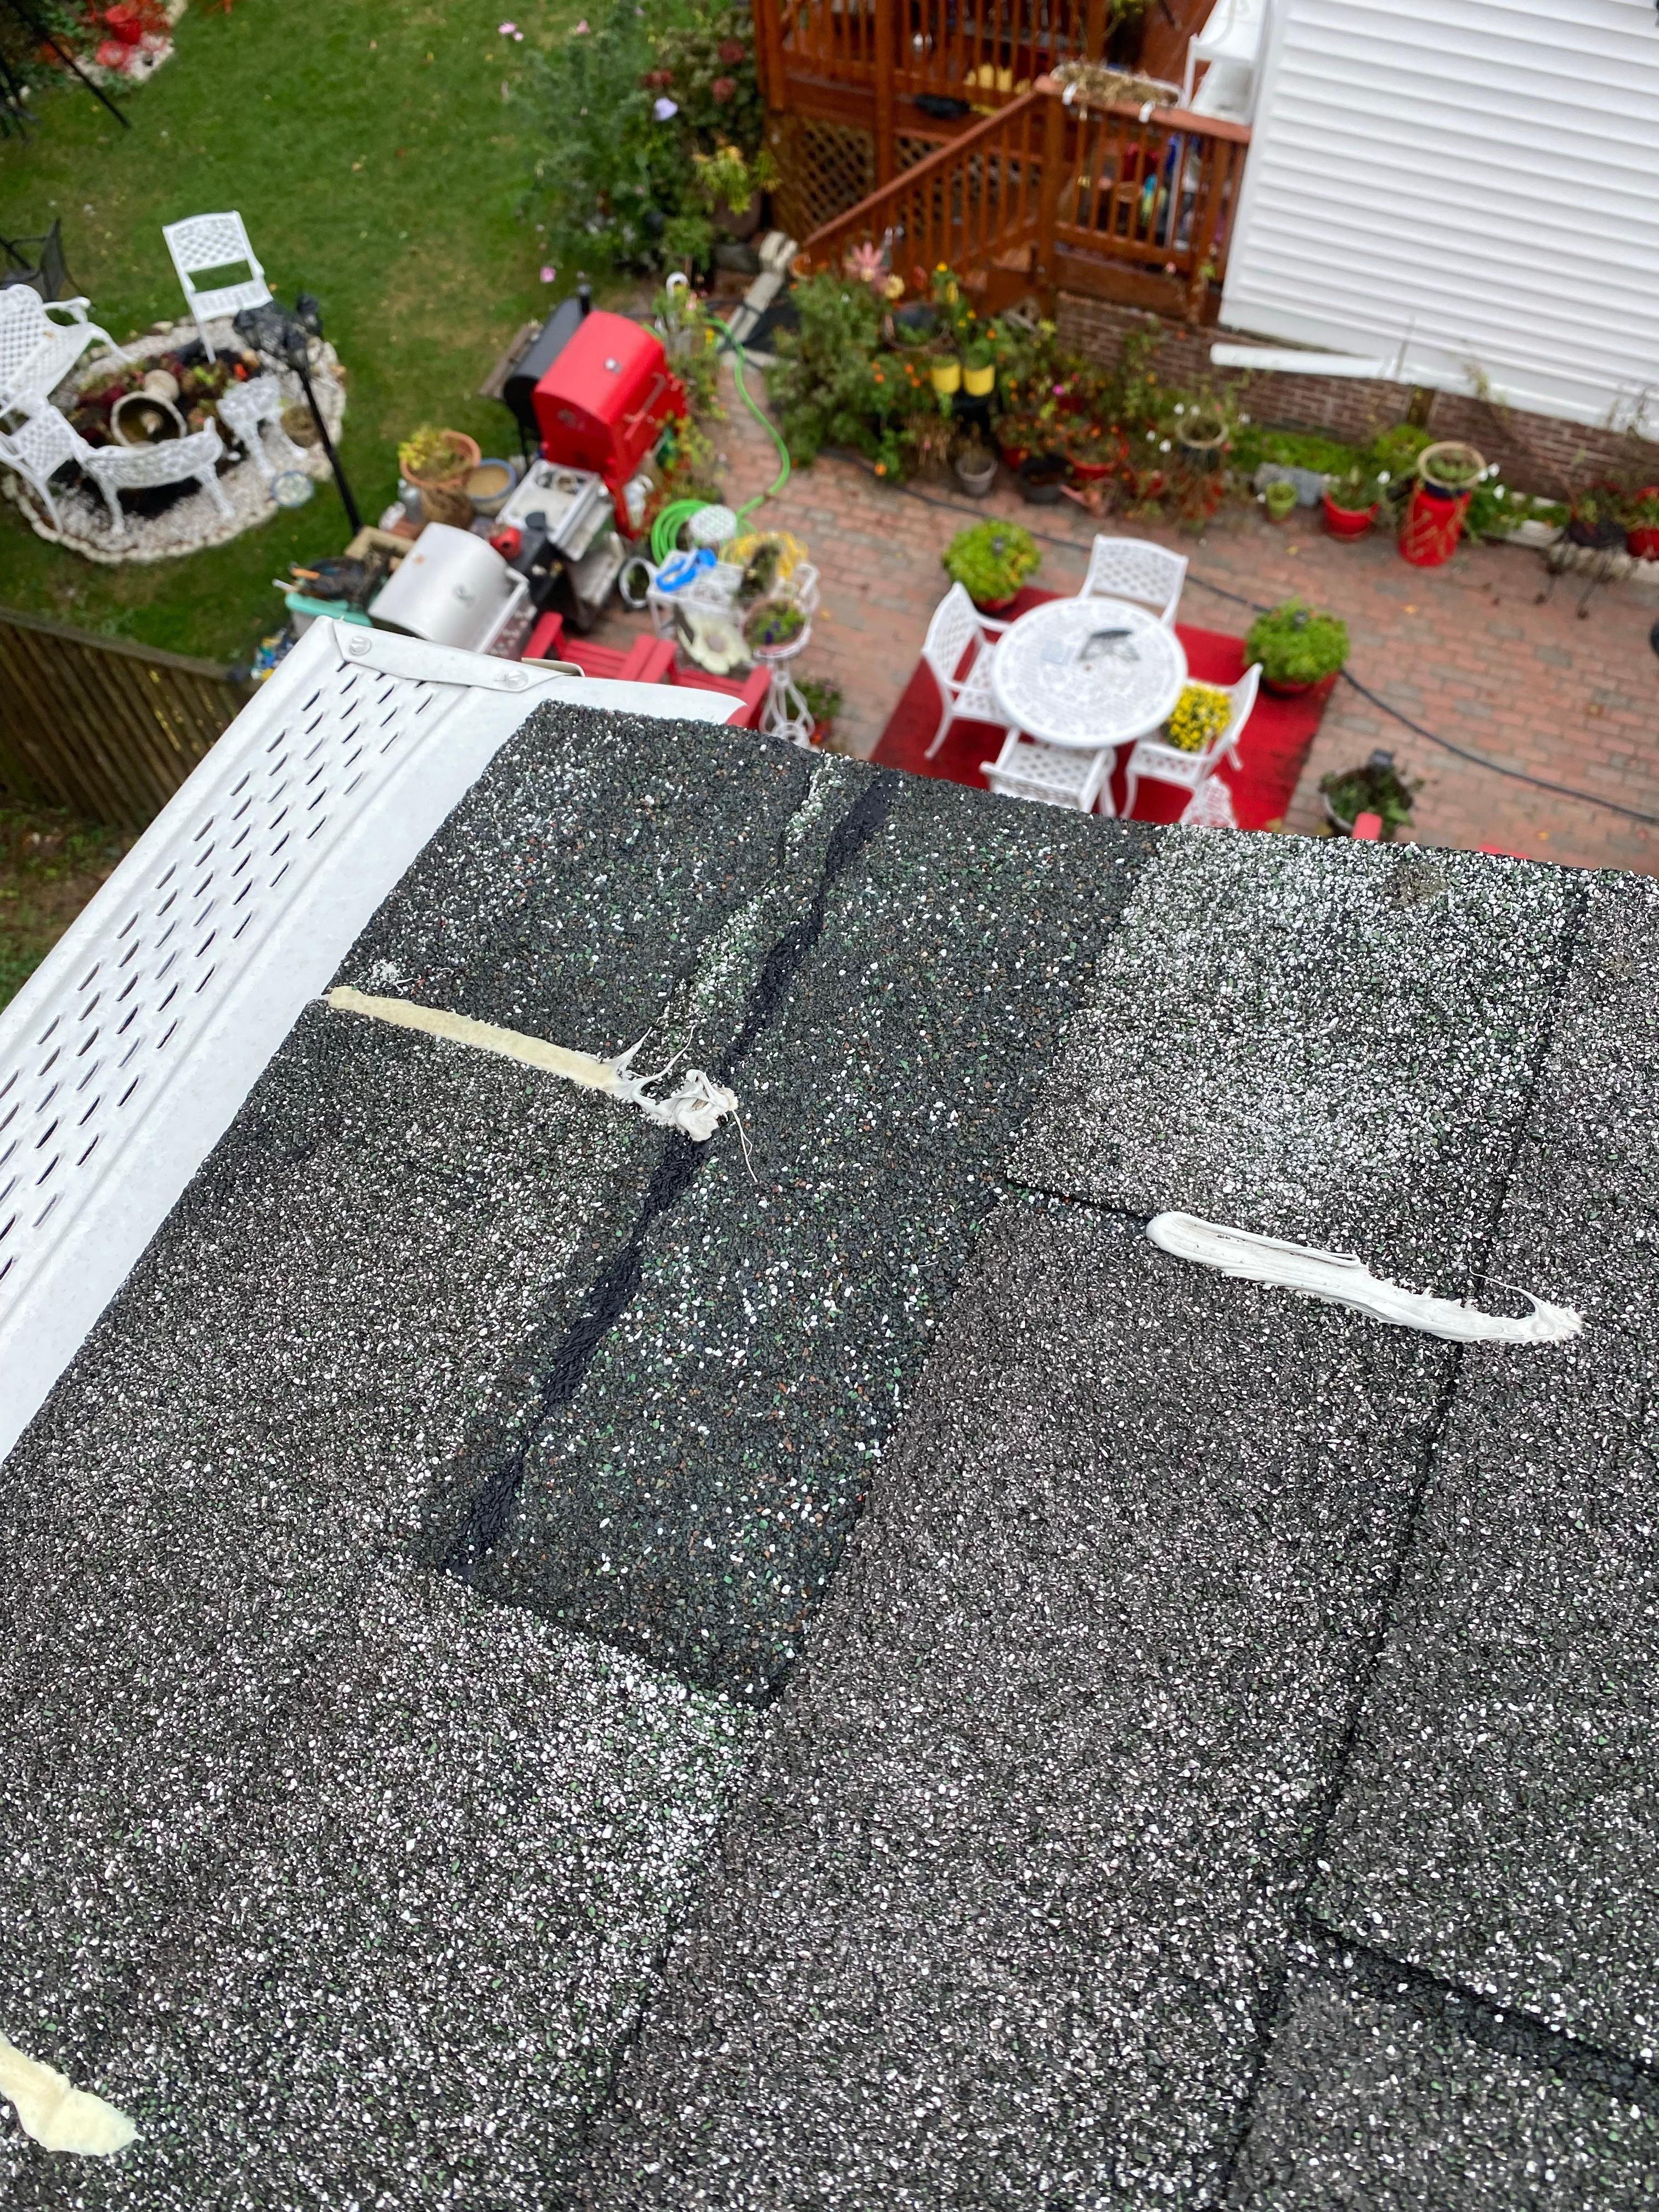 Wind damage found on an old 3 tab shingled roof